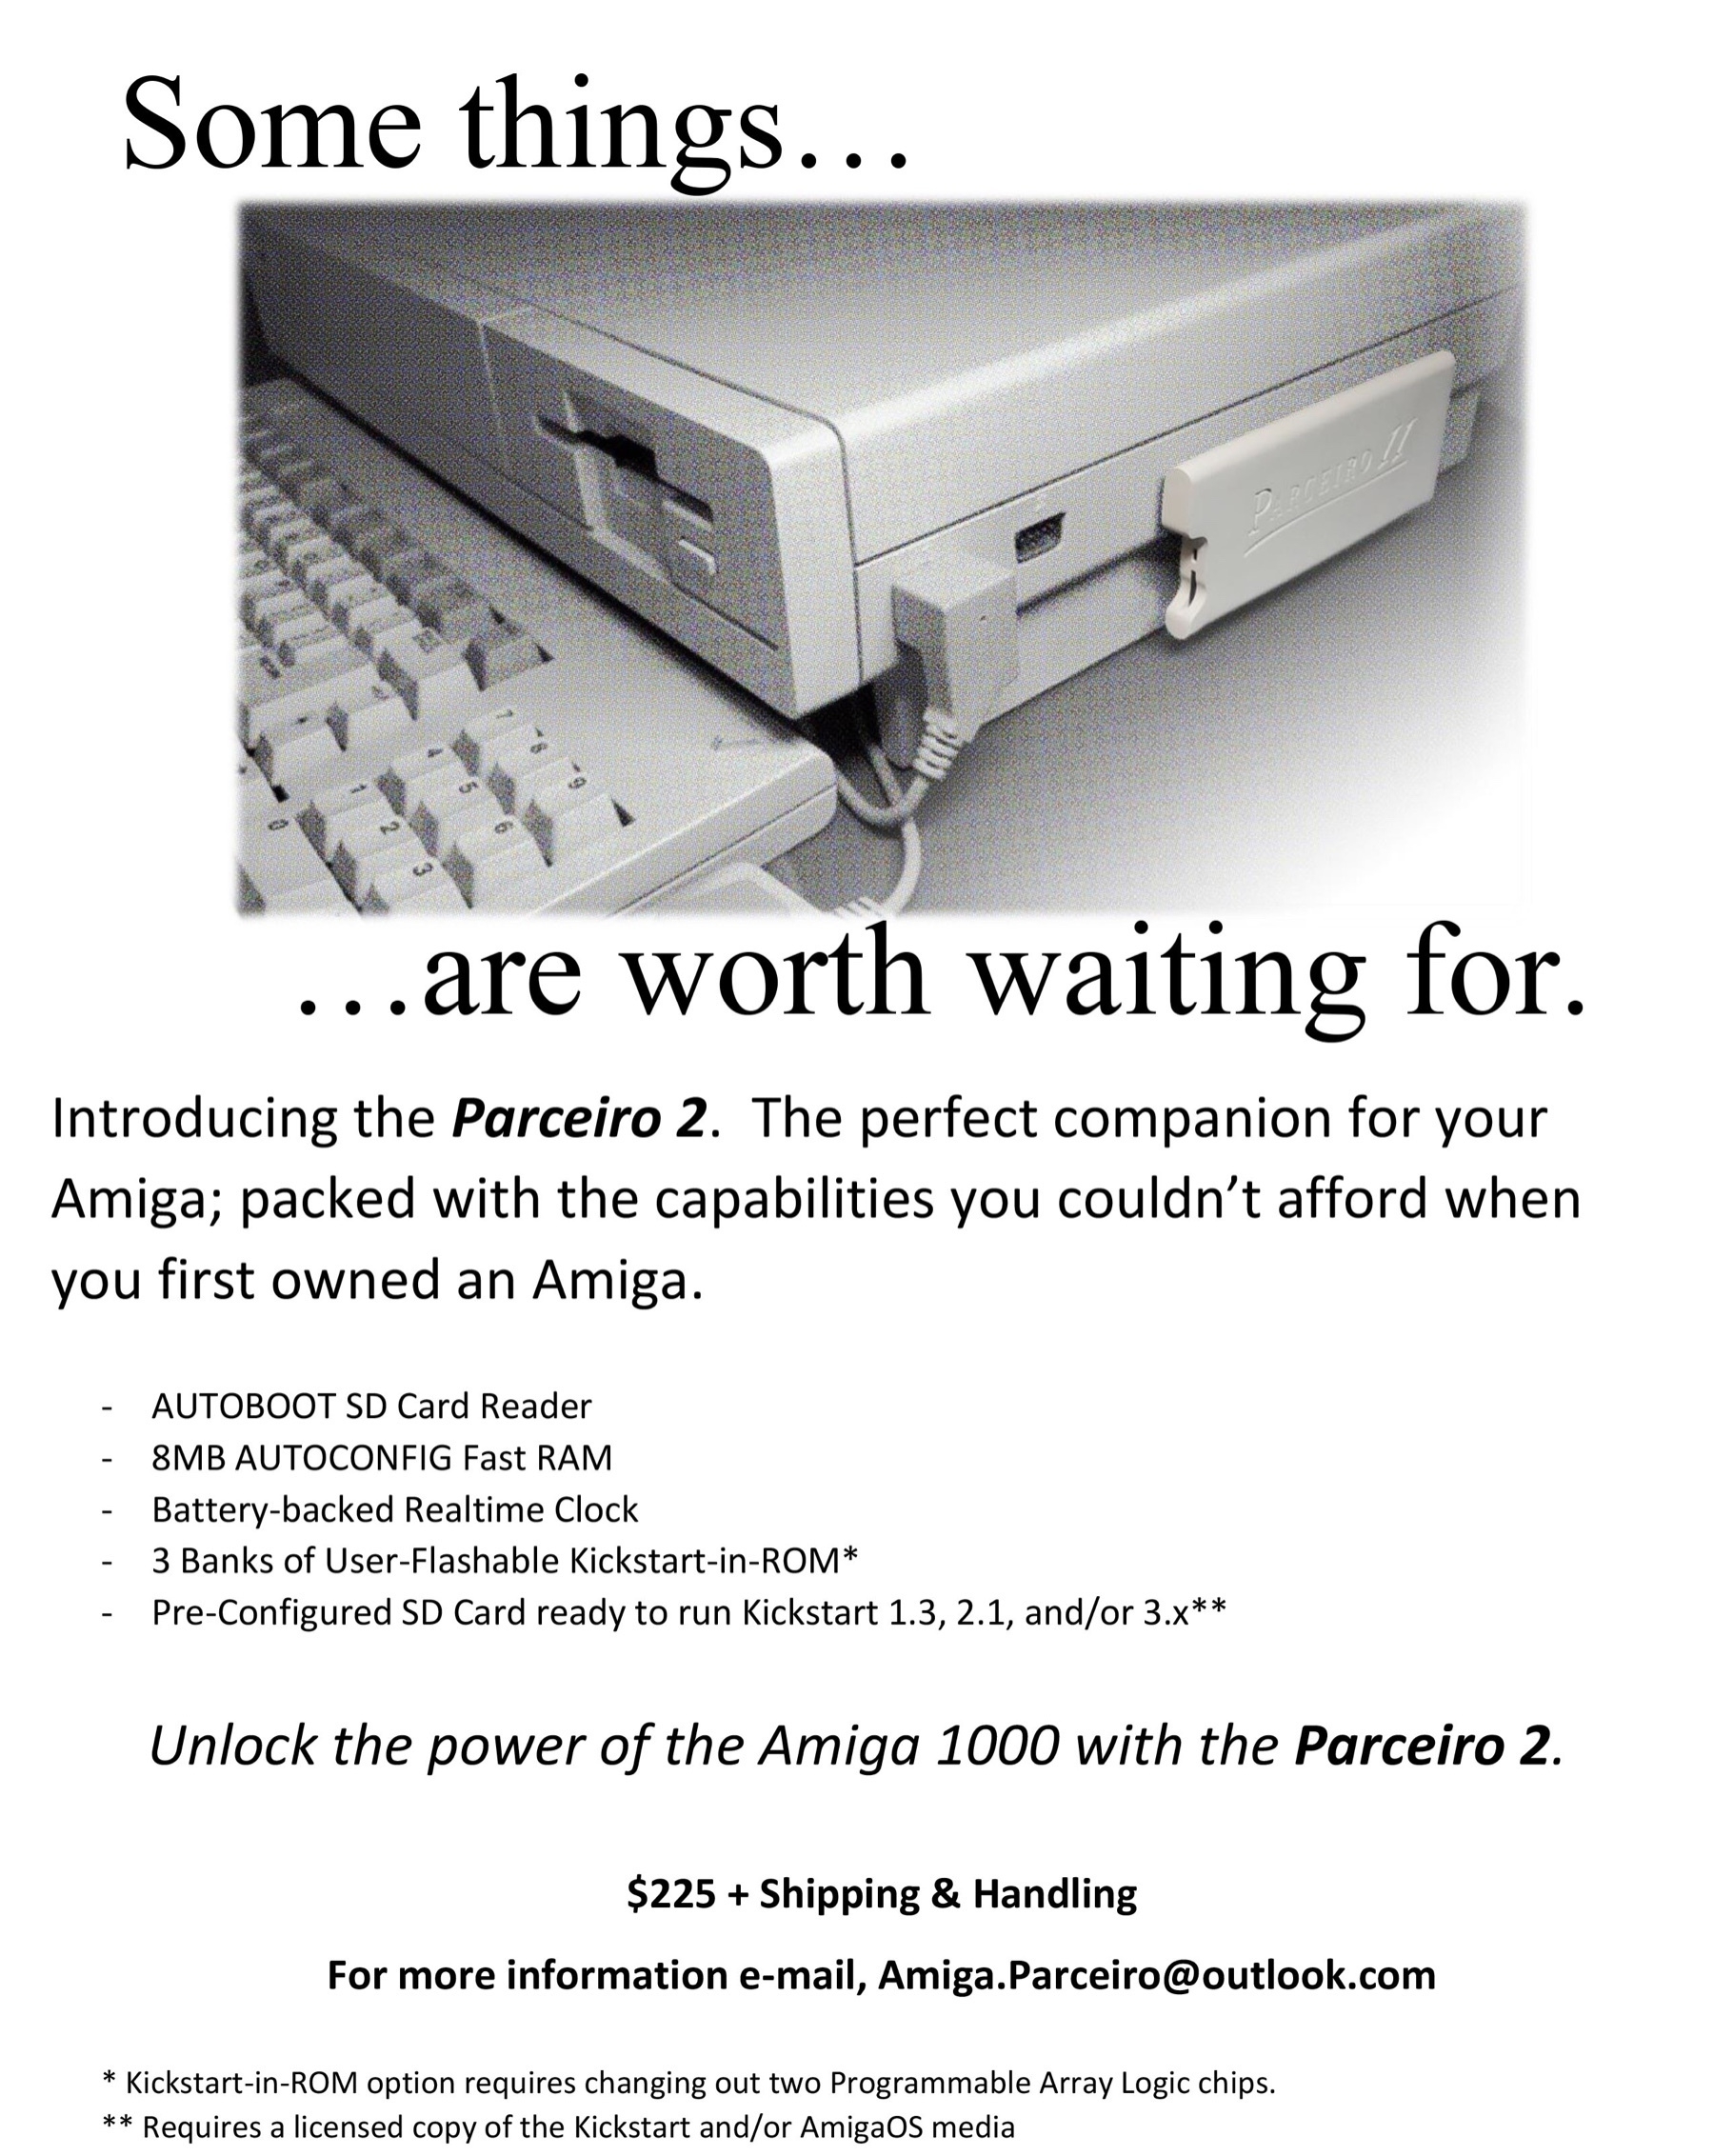 Some things are worth waiting for. Introducing the Parceiro 2. The perfect companion for your Amiga; packed with the capabilities you couldn't afford when you first owned an Amiga. ﻿﻿AUTOBOOT SD Card Reader; ﻿﻿8MB AUTOCONFIG Fast RAM; Battery-backed Realtime Clock; ﻿3 Banks of User-Flashable Kickstart-in-ROM*; ﻿﻿Pre-Configured SD Card ready to run Kickstart 1.3, 2.1, and/or 3.x**. Unlock the power of the Amiga 1000 with the Parceiro 2. $225 + Shipping & Handling. For more information e-mail, Amiga dot Parceiro at outlook dot com. *Kickstart-in-ROM option requires changing out two Programmable Array Logic chips. **Requires a licensed copy of the Kickstart and or AmigaOS media.